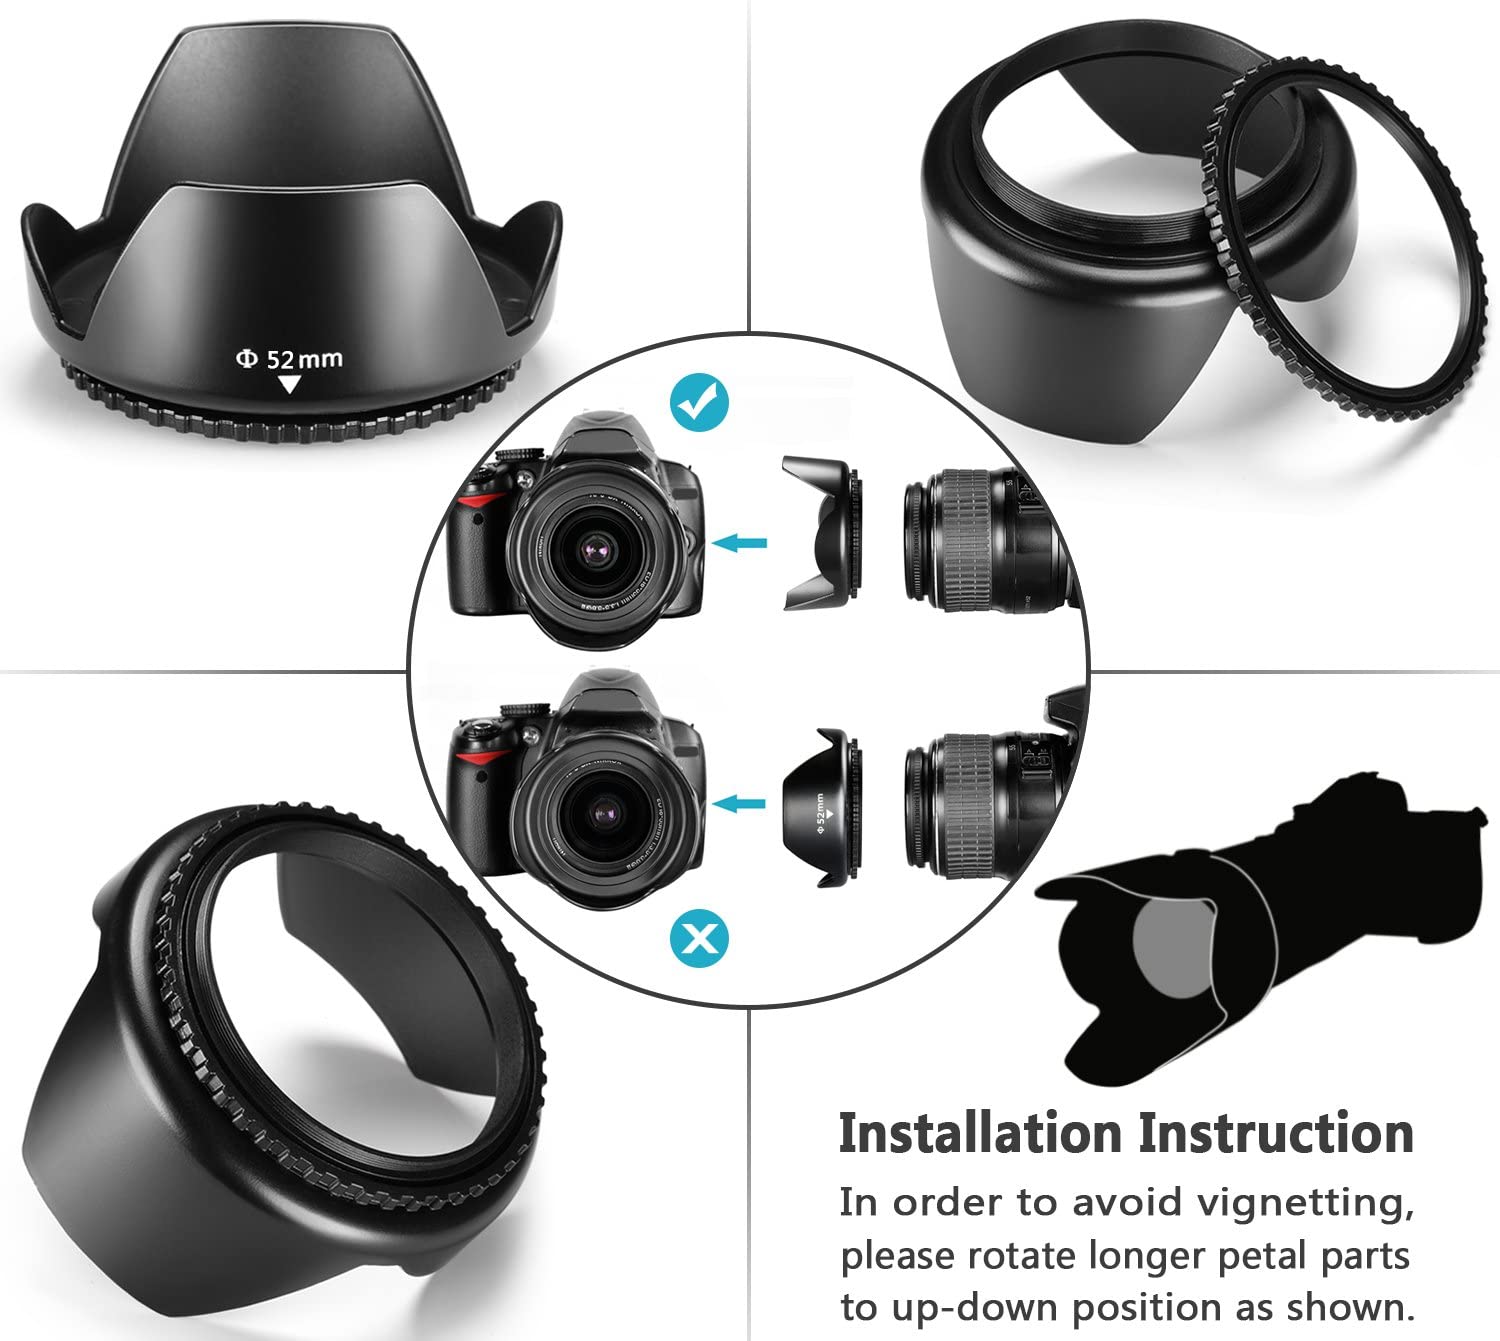 neewer 52mm complete lens filter accessory kit for lenses with Neewer 52mm complete lens filter accessory kit for lenses with 52mm